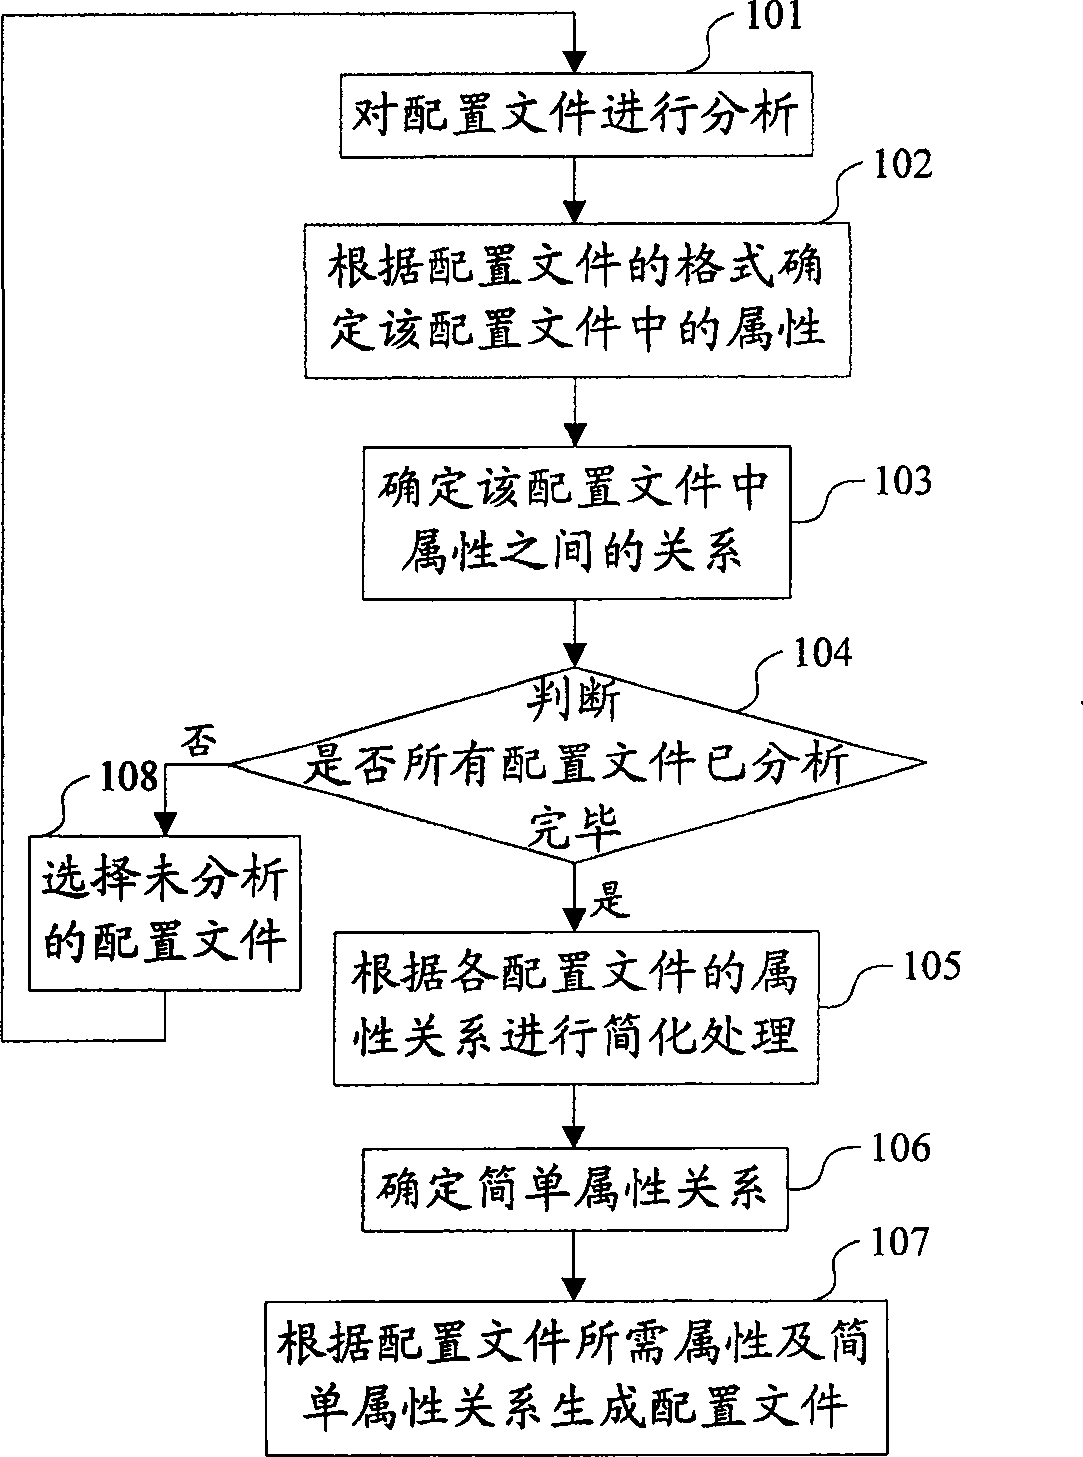 Processing method and apparatus for file configuration